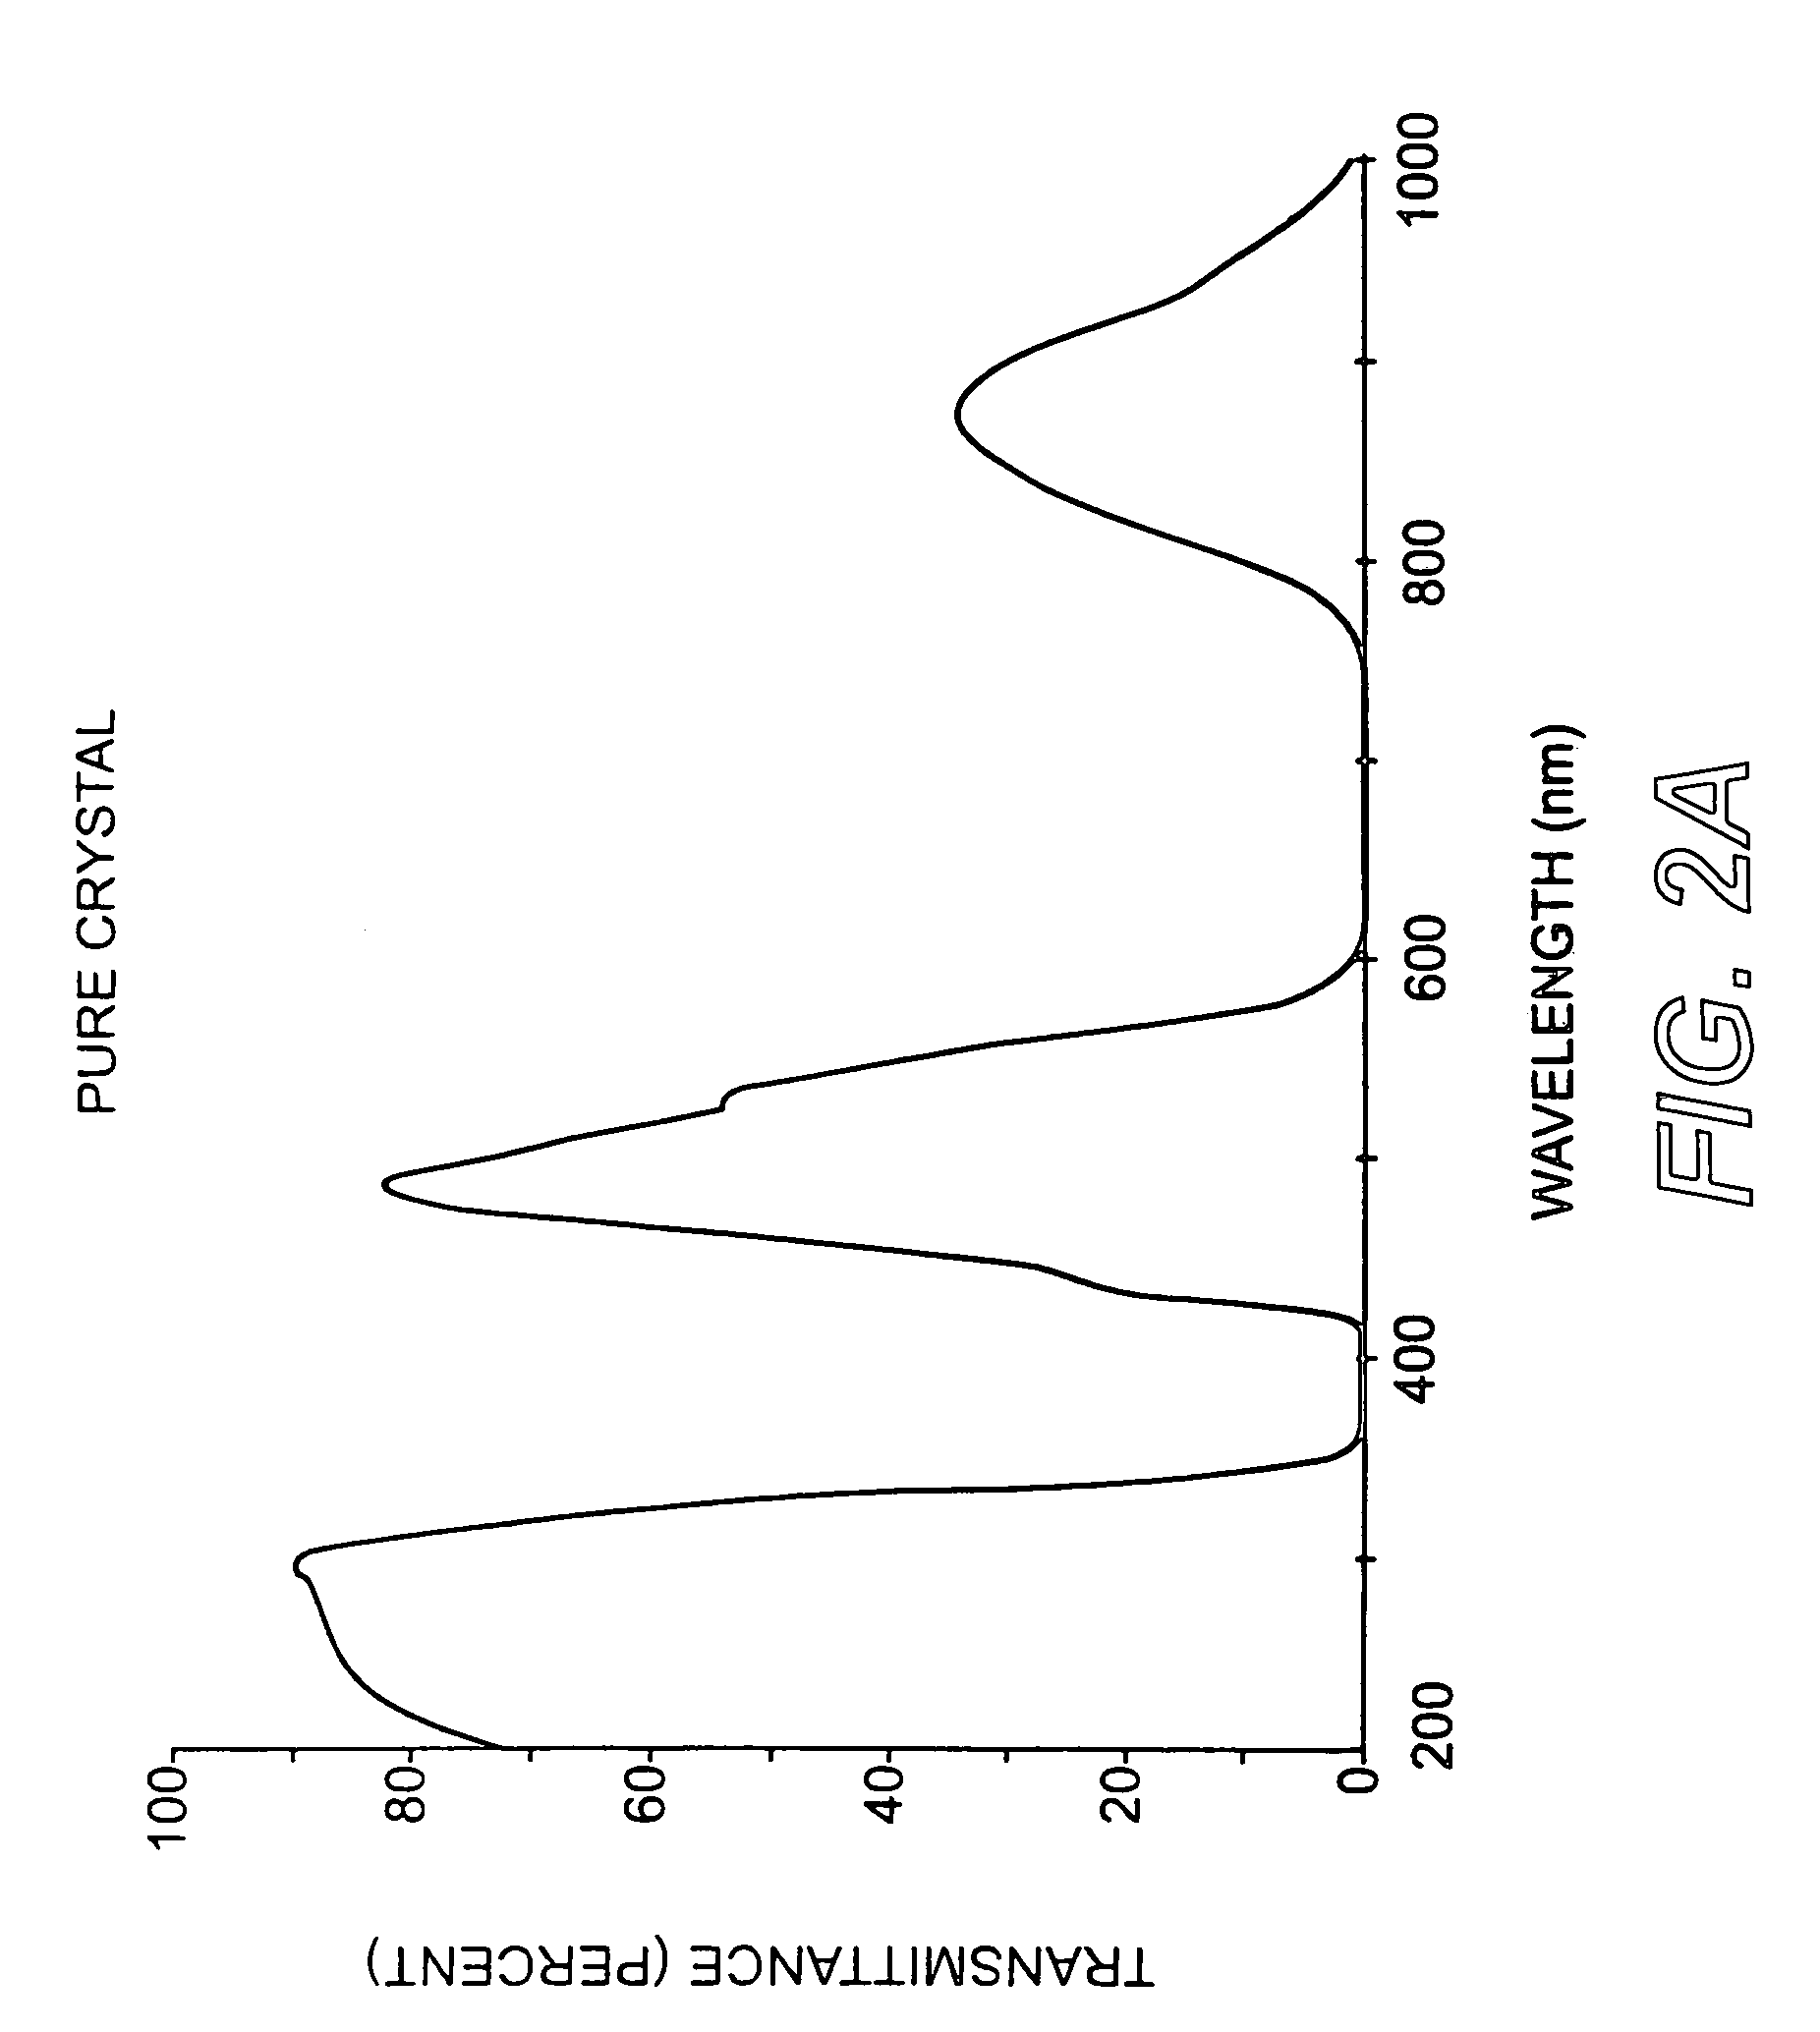 Nuclear radiation detection system